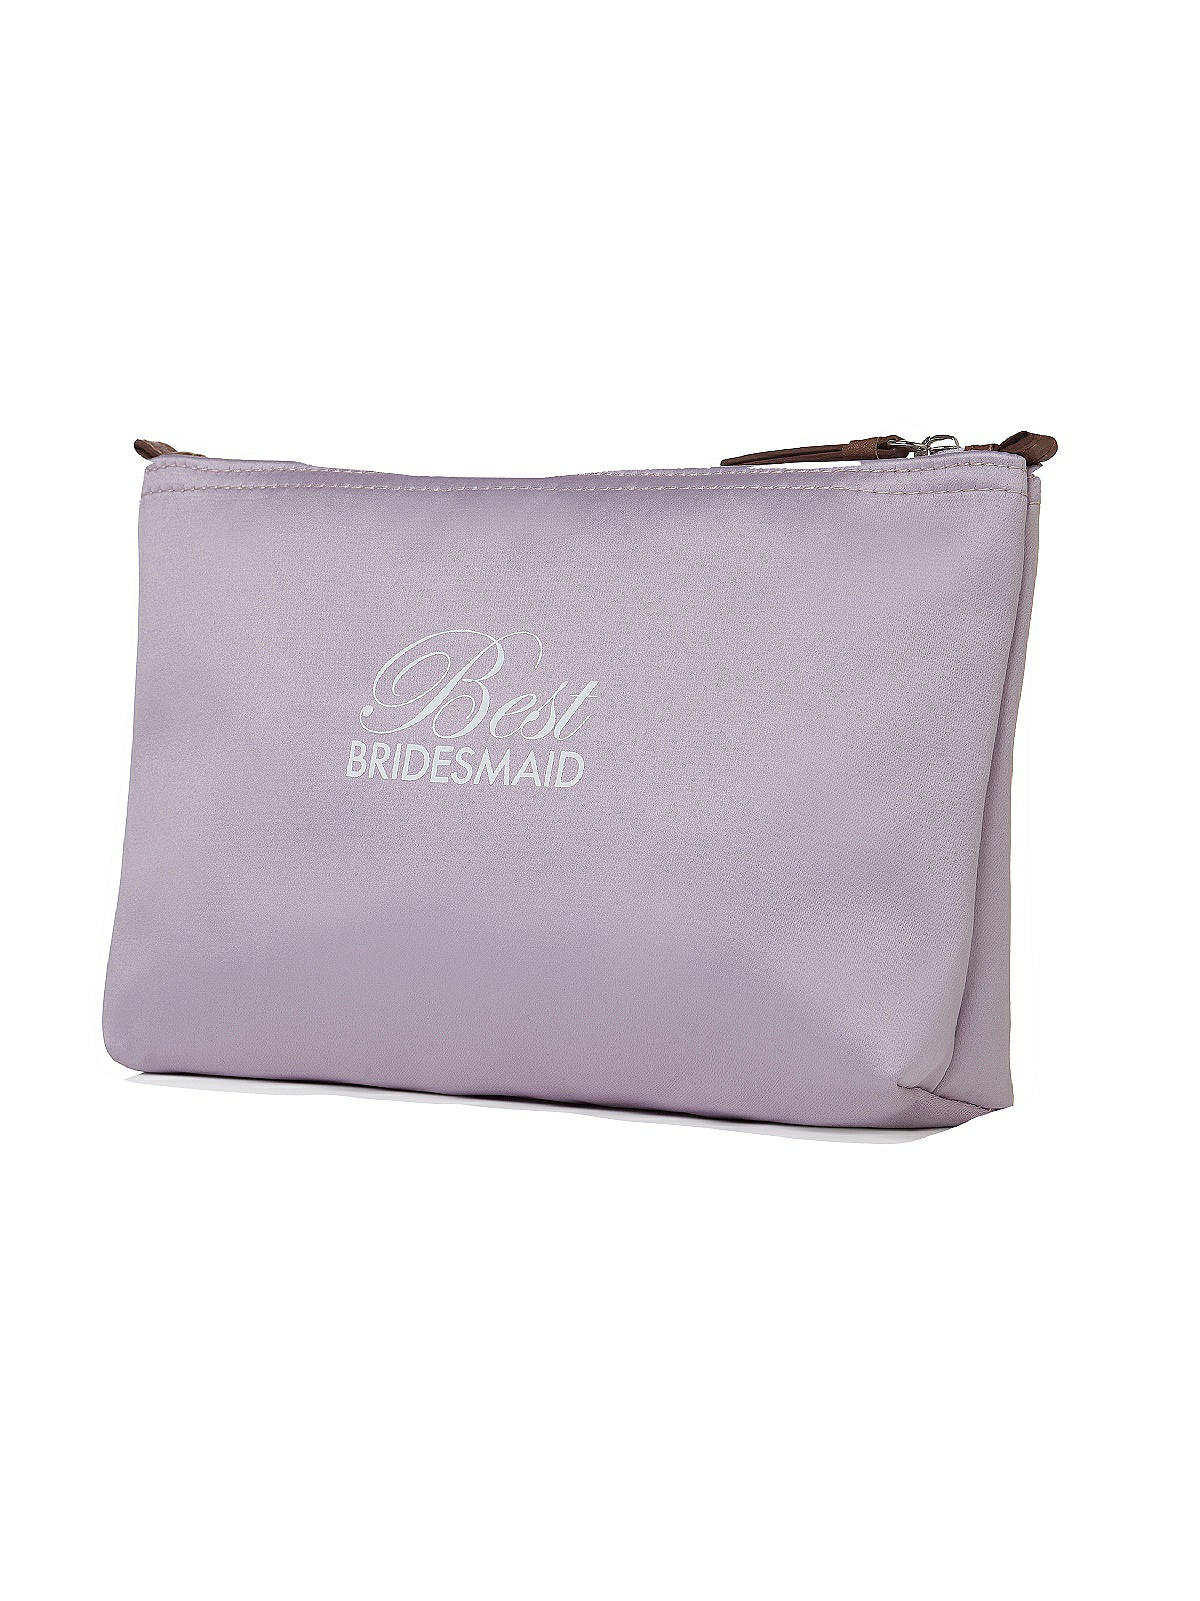 Best Bridesmaid Satin Cosmetics Bag In Suede Rose | The Dessy Group